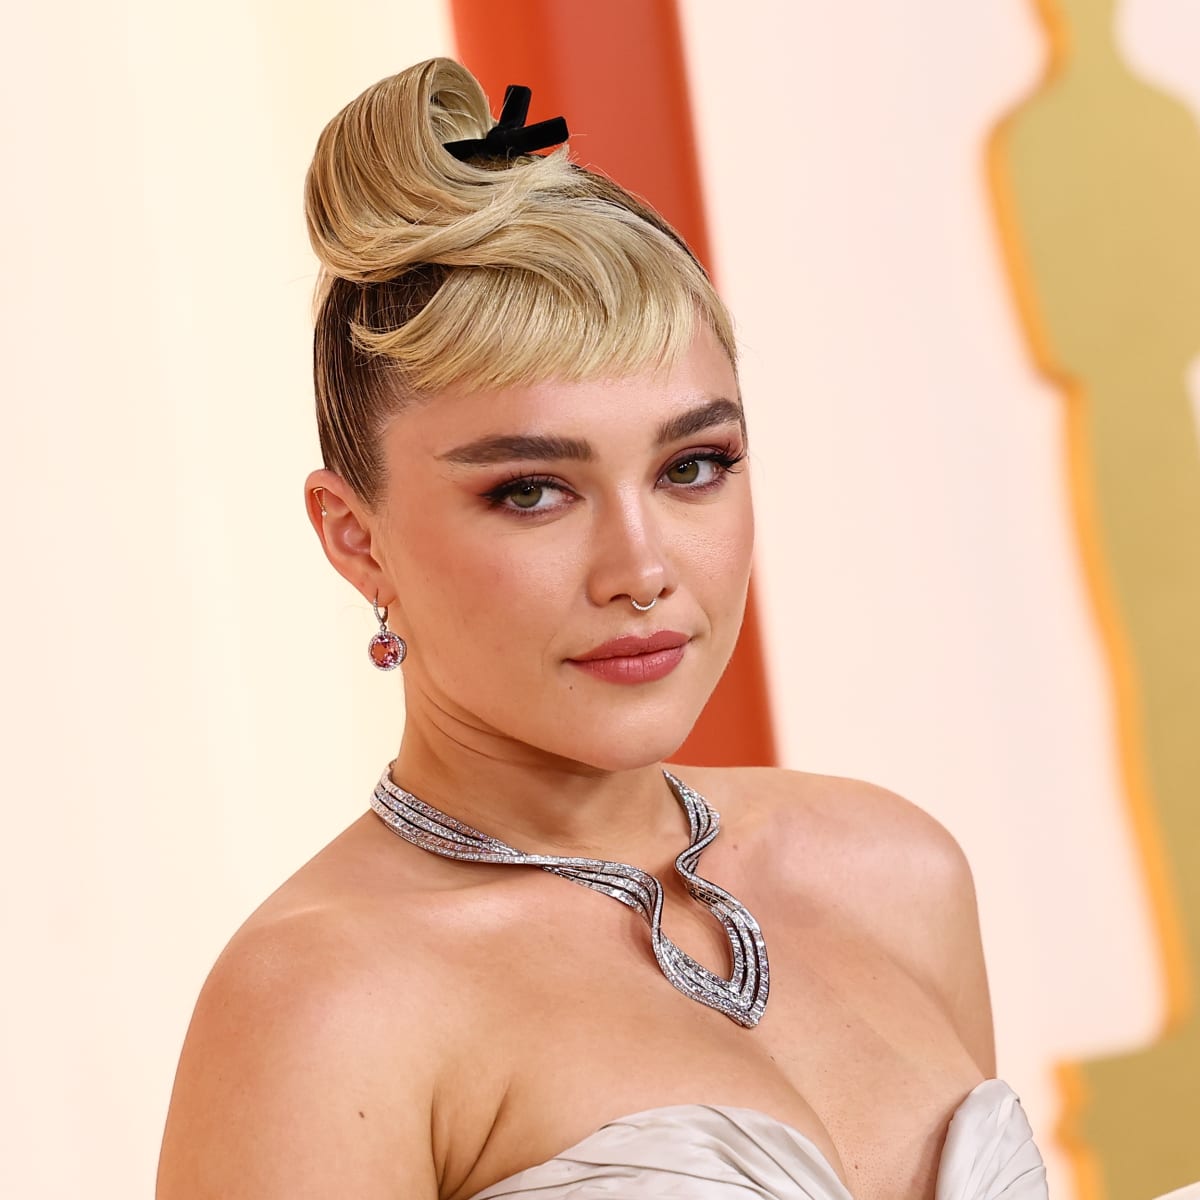 The Best Hair and Makeup Looks at the 2021 Oscars — See Photos